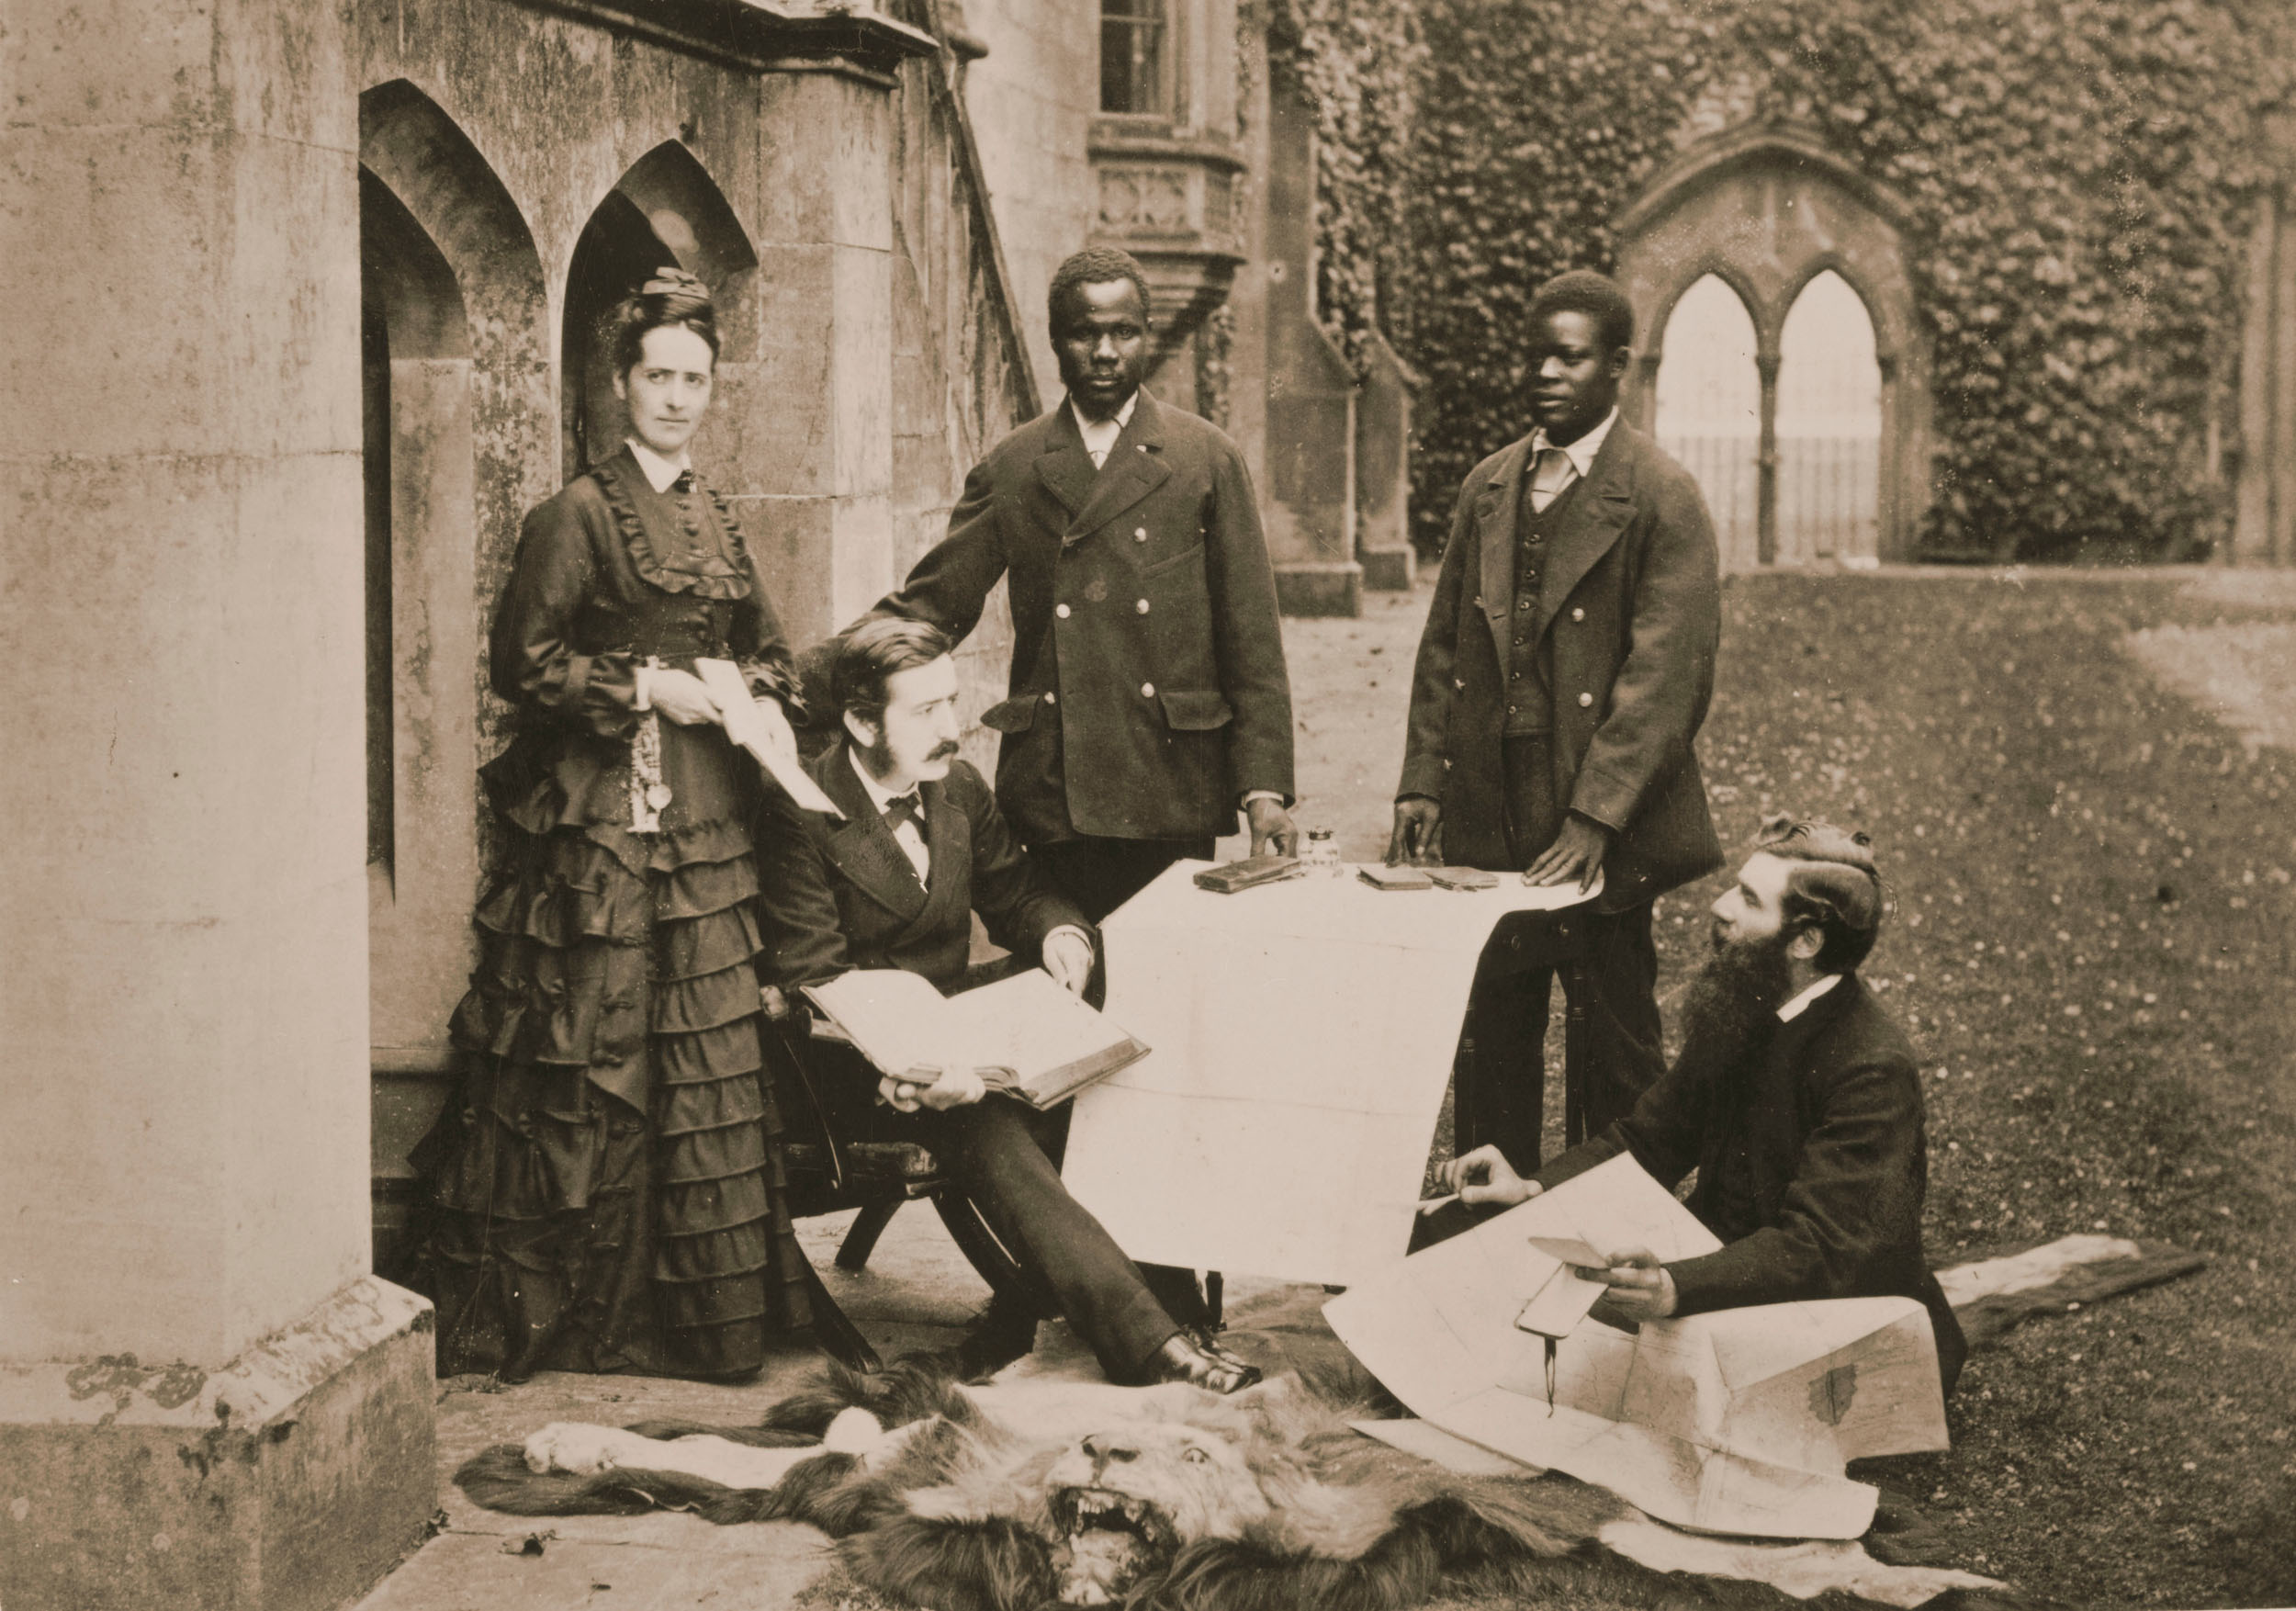 Agnes and Thomas Livingstone, Daughter and Son of David Livingstone, Abdullah Susi, James Chuma, and Rev. Horace Waller at Newstead Abbey, Nottingham, Discussing the Journals, Maps, and Plans Made by the Late David Livingstone, 1874. SOAS Library, University of London. Copyright Council for World Mission. Used by permission for private study, educational or research purposes only.